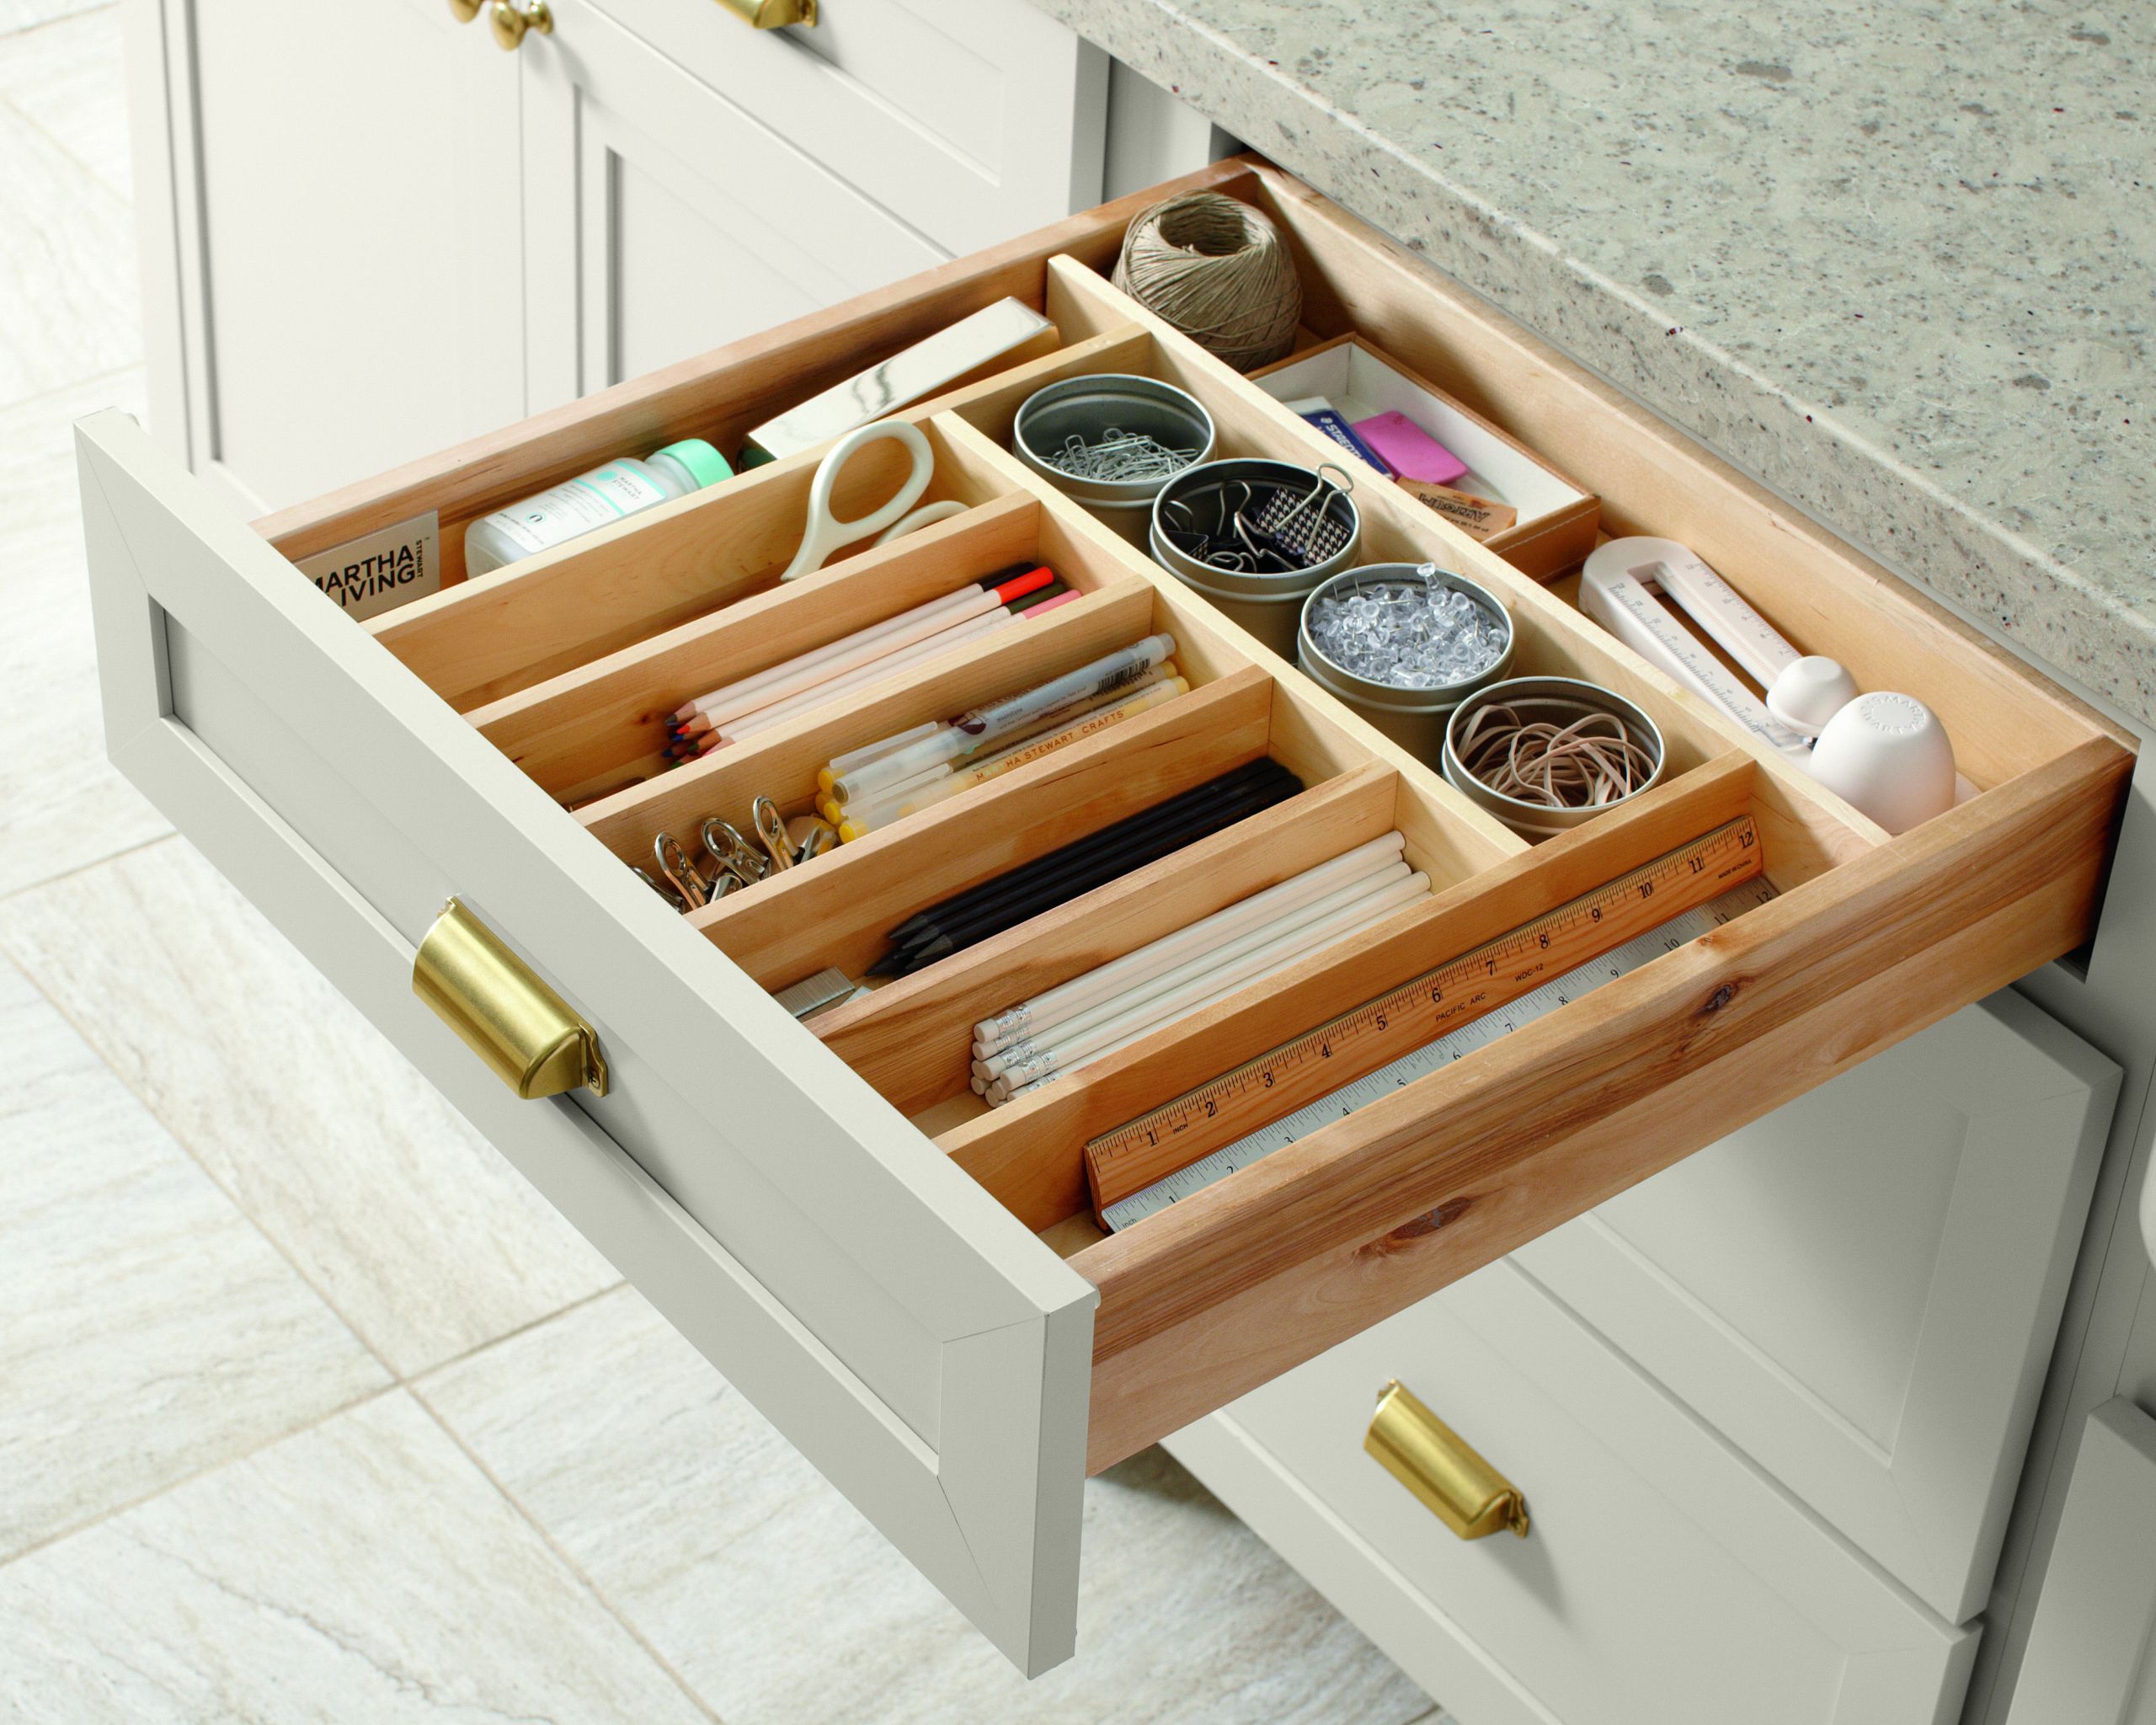 Home Depot Kitchen Organizers
 Keep your kitchen organized with built in drawer